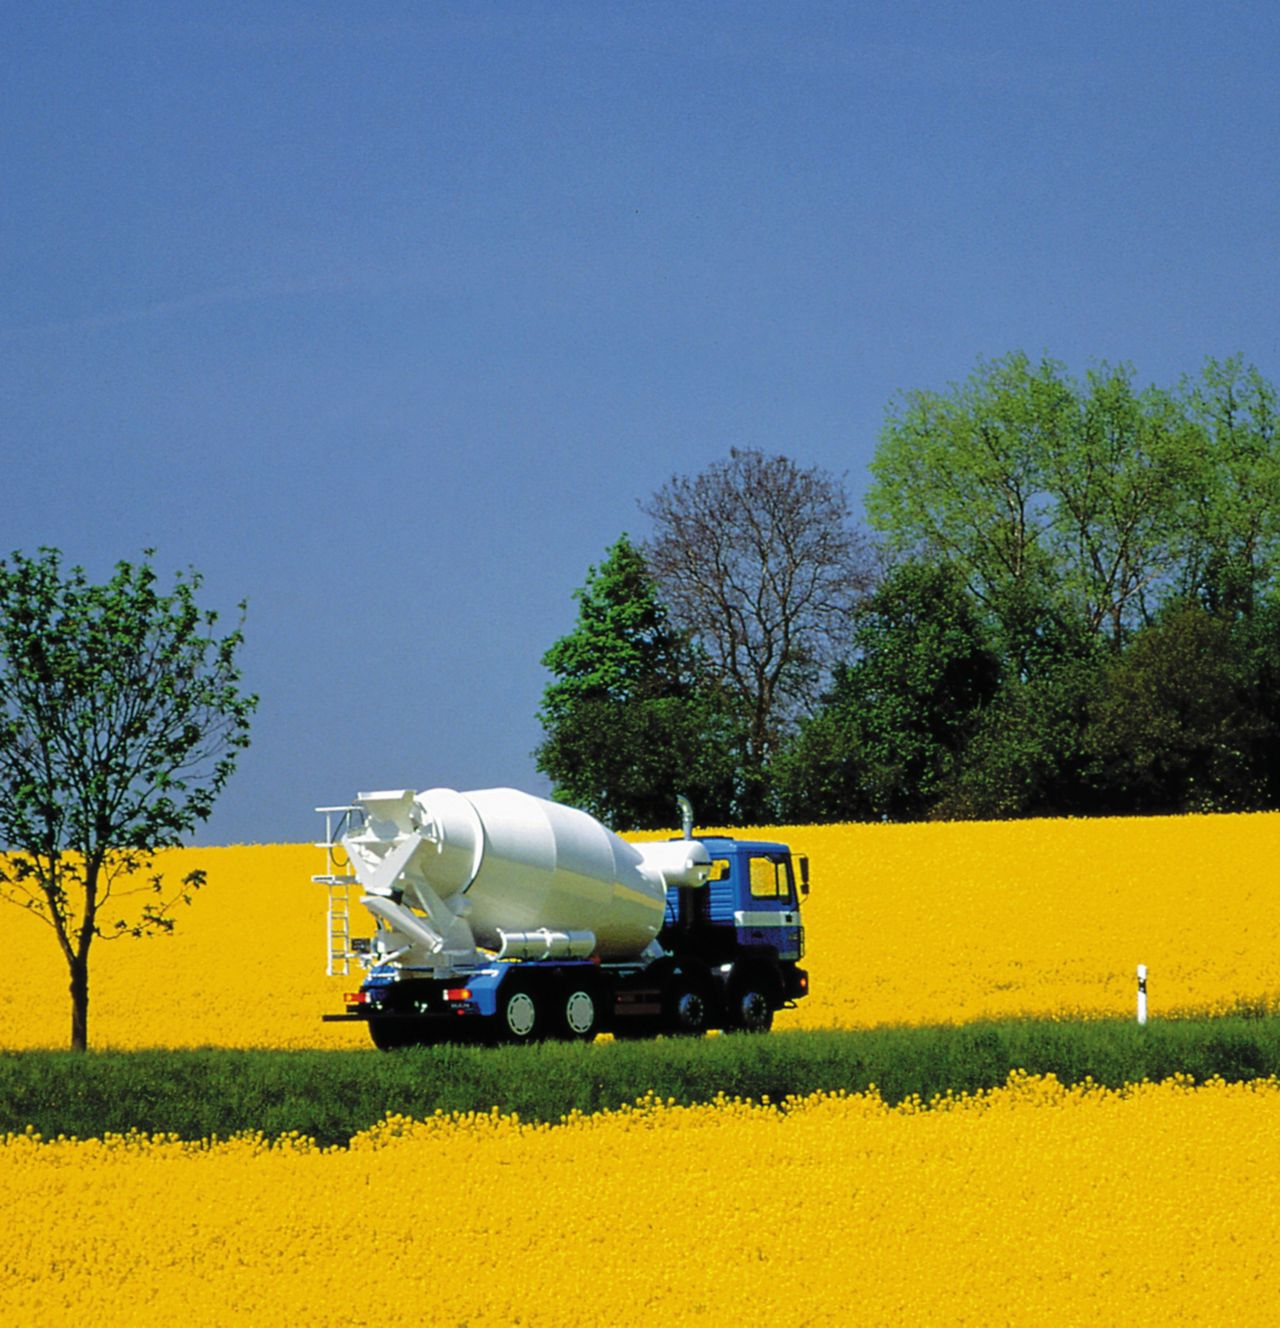 Ready-mix concrete mixing truck driving through yellow field with trees and blue sky